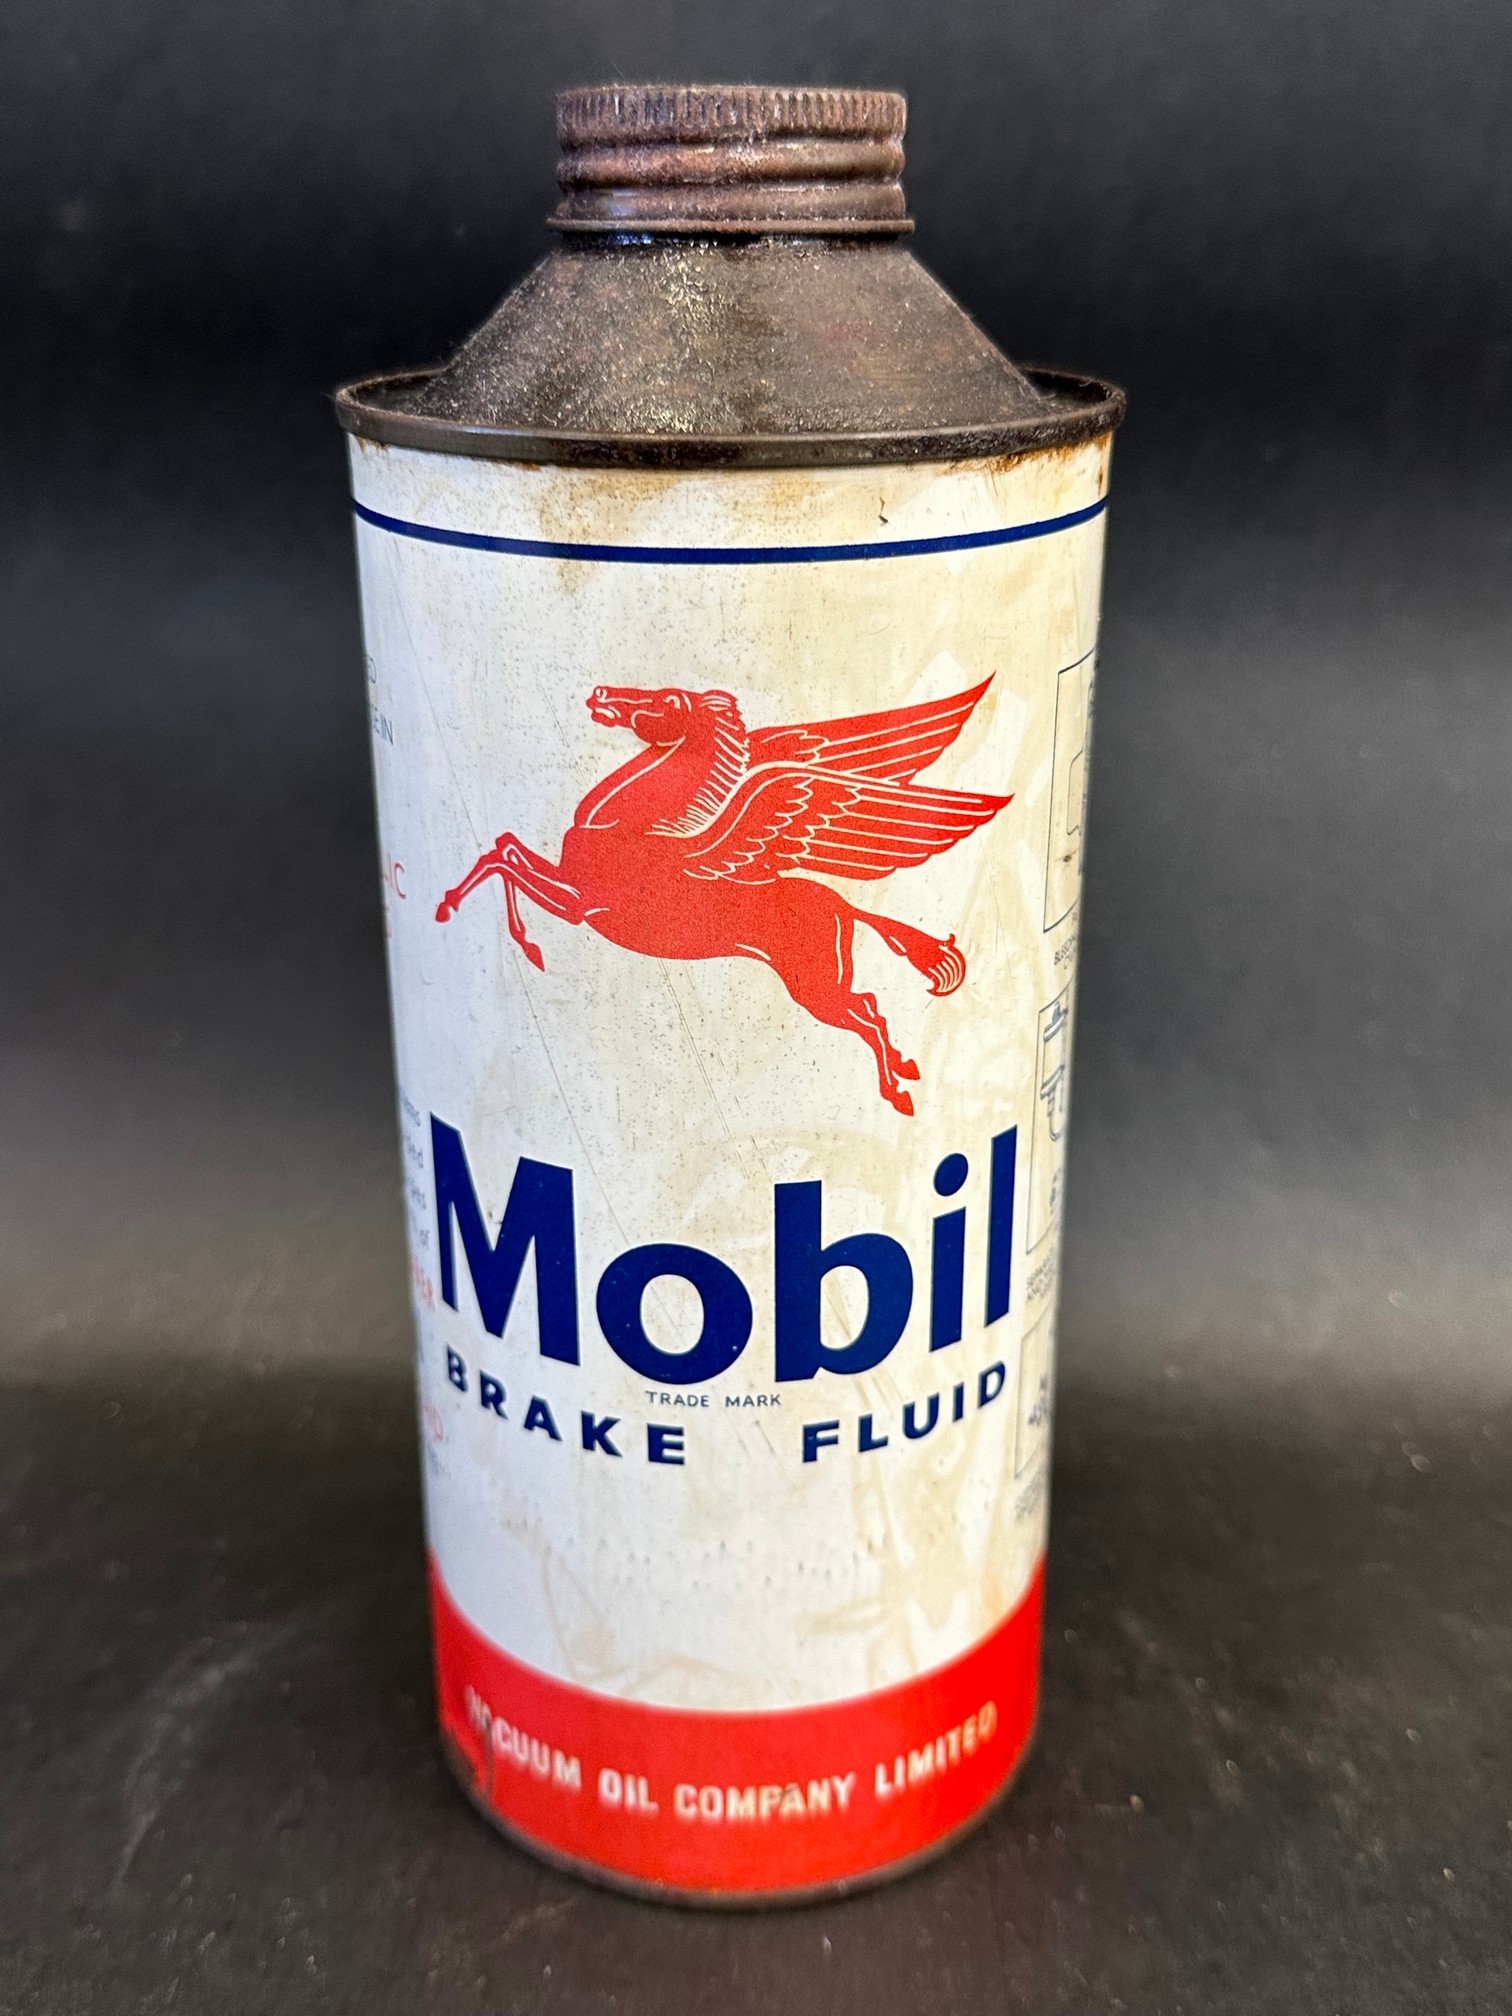 A Mobil Brake Fluid cylindrical quart can.